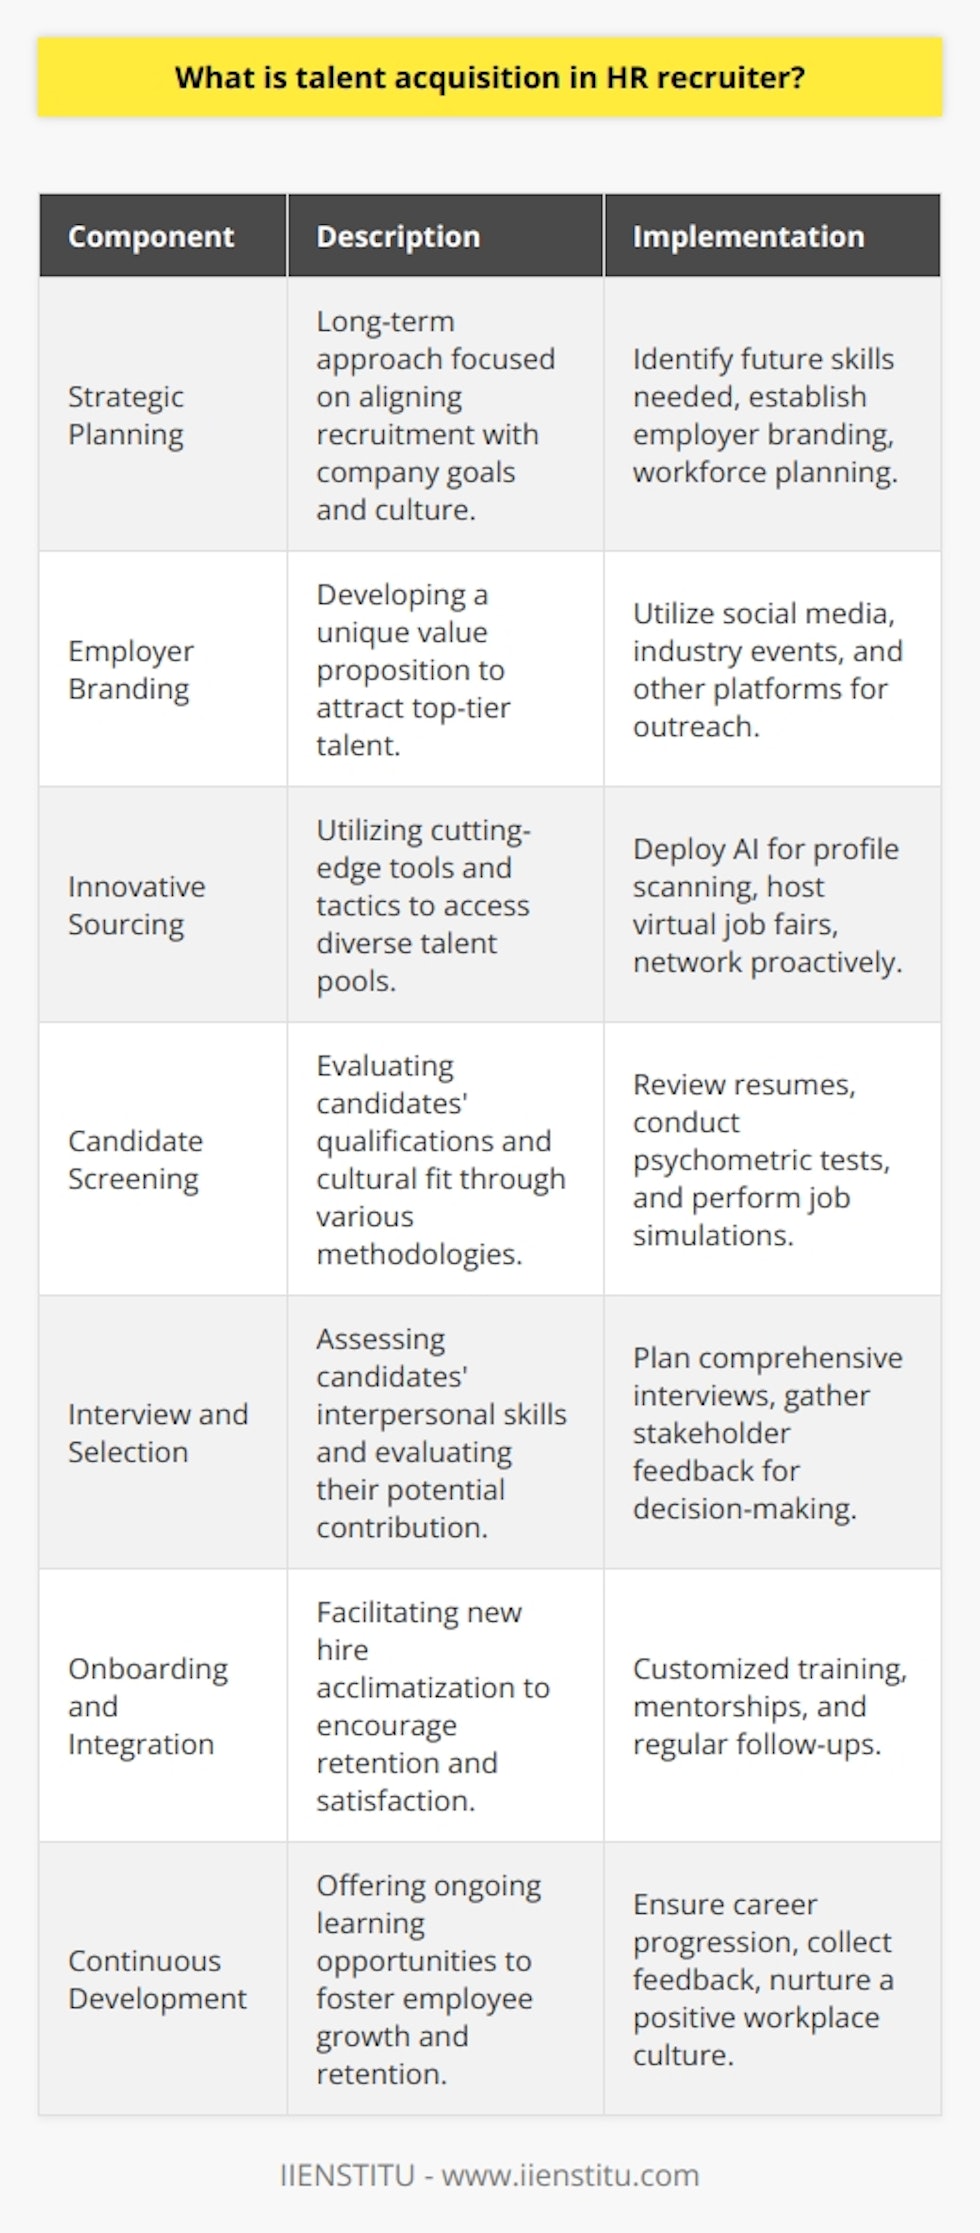 Talent Acquisition in HR RecruitmentTalent acquisition, within the context of HR recruitment, is a comprehensive and strategic approach aimed at attracting, selecting, and onboarding the most suitable candidates to meet an organization's needs. In contrast to traditional hiring, which may focus on filling immediate vacancies, talent acquisition emphasizes building a long-term workforce that aligns with the strategic goals and culture of the company.Developing a Talent Acquisition StrategyA robust talent acquisition strategy integrates various elements, including employer branding, workforce planning, relationship building, and leveraging data analytics. Recruiters, who are key players in this approach, not only scout for talent but also lay down the infrastructure for a sustainable talent pool. By understanding market trends and forecasting future skill requirements, they can proactively identify and engage with prospective candidates before a need arises.Employer Branding and OutreachCrafting a compelling employer brand is vital for attracting top talent in an increasingly competitive market. The employer's value proposition—what sets them apart from others—must be communicated effectively. In order to do this, recruiters harness a variety of platforms, from social media to industry conferences. They work to position the organization as a desirable place to work, showcasing its values, culture, and career opportunities.Innovative Sourcing TechniquesRecruiters use an array of innovative sourcing techniques to tap into different talent pools. They might leverage AI-powered tools to scan online profiles or interact with potential candidates through virtual career fairs. The goal is to create a diverse candidate pool from which the most promising talent can emerge.Screening and Candidate EvaluationScreening is a critical phase where resumes are reviewed and candidates are assessed for their professional and personal alignment with role requirements. Recruiters may utilize psychometric tests or job simulations to gauge skills and cultural fit objectively. By doing so, they ensure that only those candidates who are genuinely apt for the organization progress to the interview stage.In-Depth Interviews and SelectionInterviews are the lens through which a recruiter analyzes a candidate's soft skills and suitability for the team. These interactions are meticulously planned to challenge the candidate and reveal their potential. The selection process involves collaborative decision-making, wherein feedback from various stakeholders is considered to determine the right fit for the role.Onboarding and IntegrationThe journey of talent acquisition extends to onboarding, where the focus is on integrating the new hire into the organization smoothly. An effective onboarding plan encompasses training tailored to the individual's role, mentorship opportunities, and regular check-ins. This helps engender loyalty and fosters a positive work environment that encourages retention.Continuous Development and RetentionThe role of talent acquisition is continuous and does not conclude once the hiring process is over. To retain top talent, recruiters, along with other HR professionals, must ensure opportunities for continuous learning and career progression are available. They should also seek regular feedback from employees and foster a healthy work culture that encourages engagement and innovation.Talent acquisition, therefore, is a nuanced and future-oriented aspect of HR recruitment that not only seeks to hire the most qualified candidates but also ensures they thrive within the organization, contributing to its overall success and sustainability.